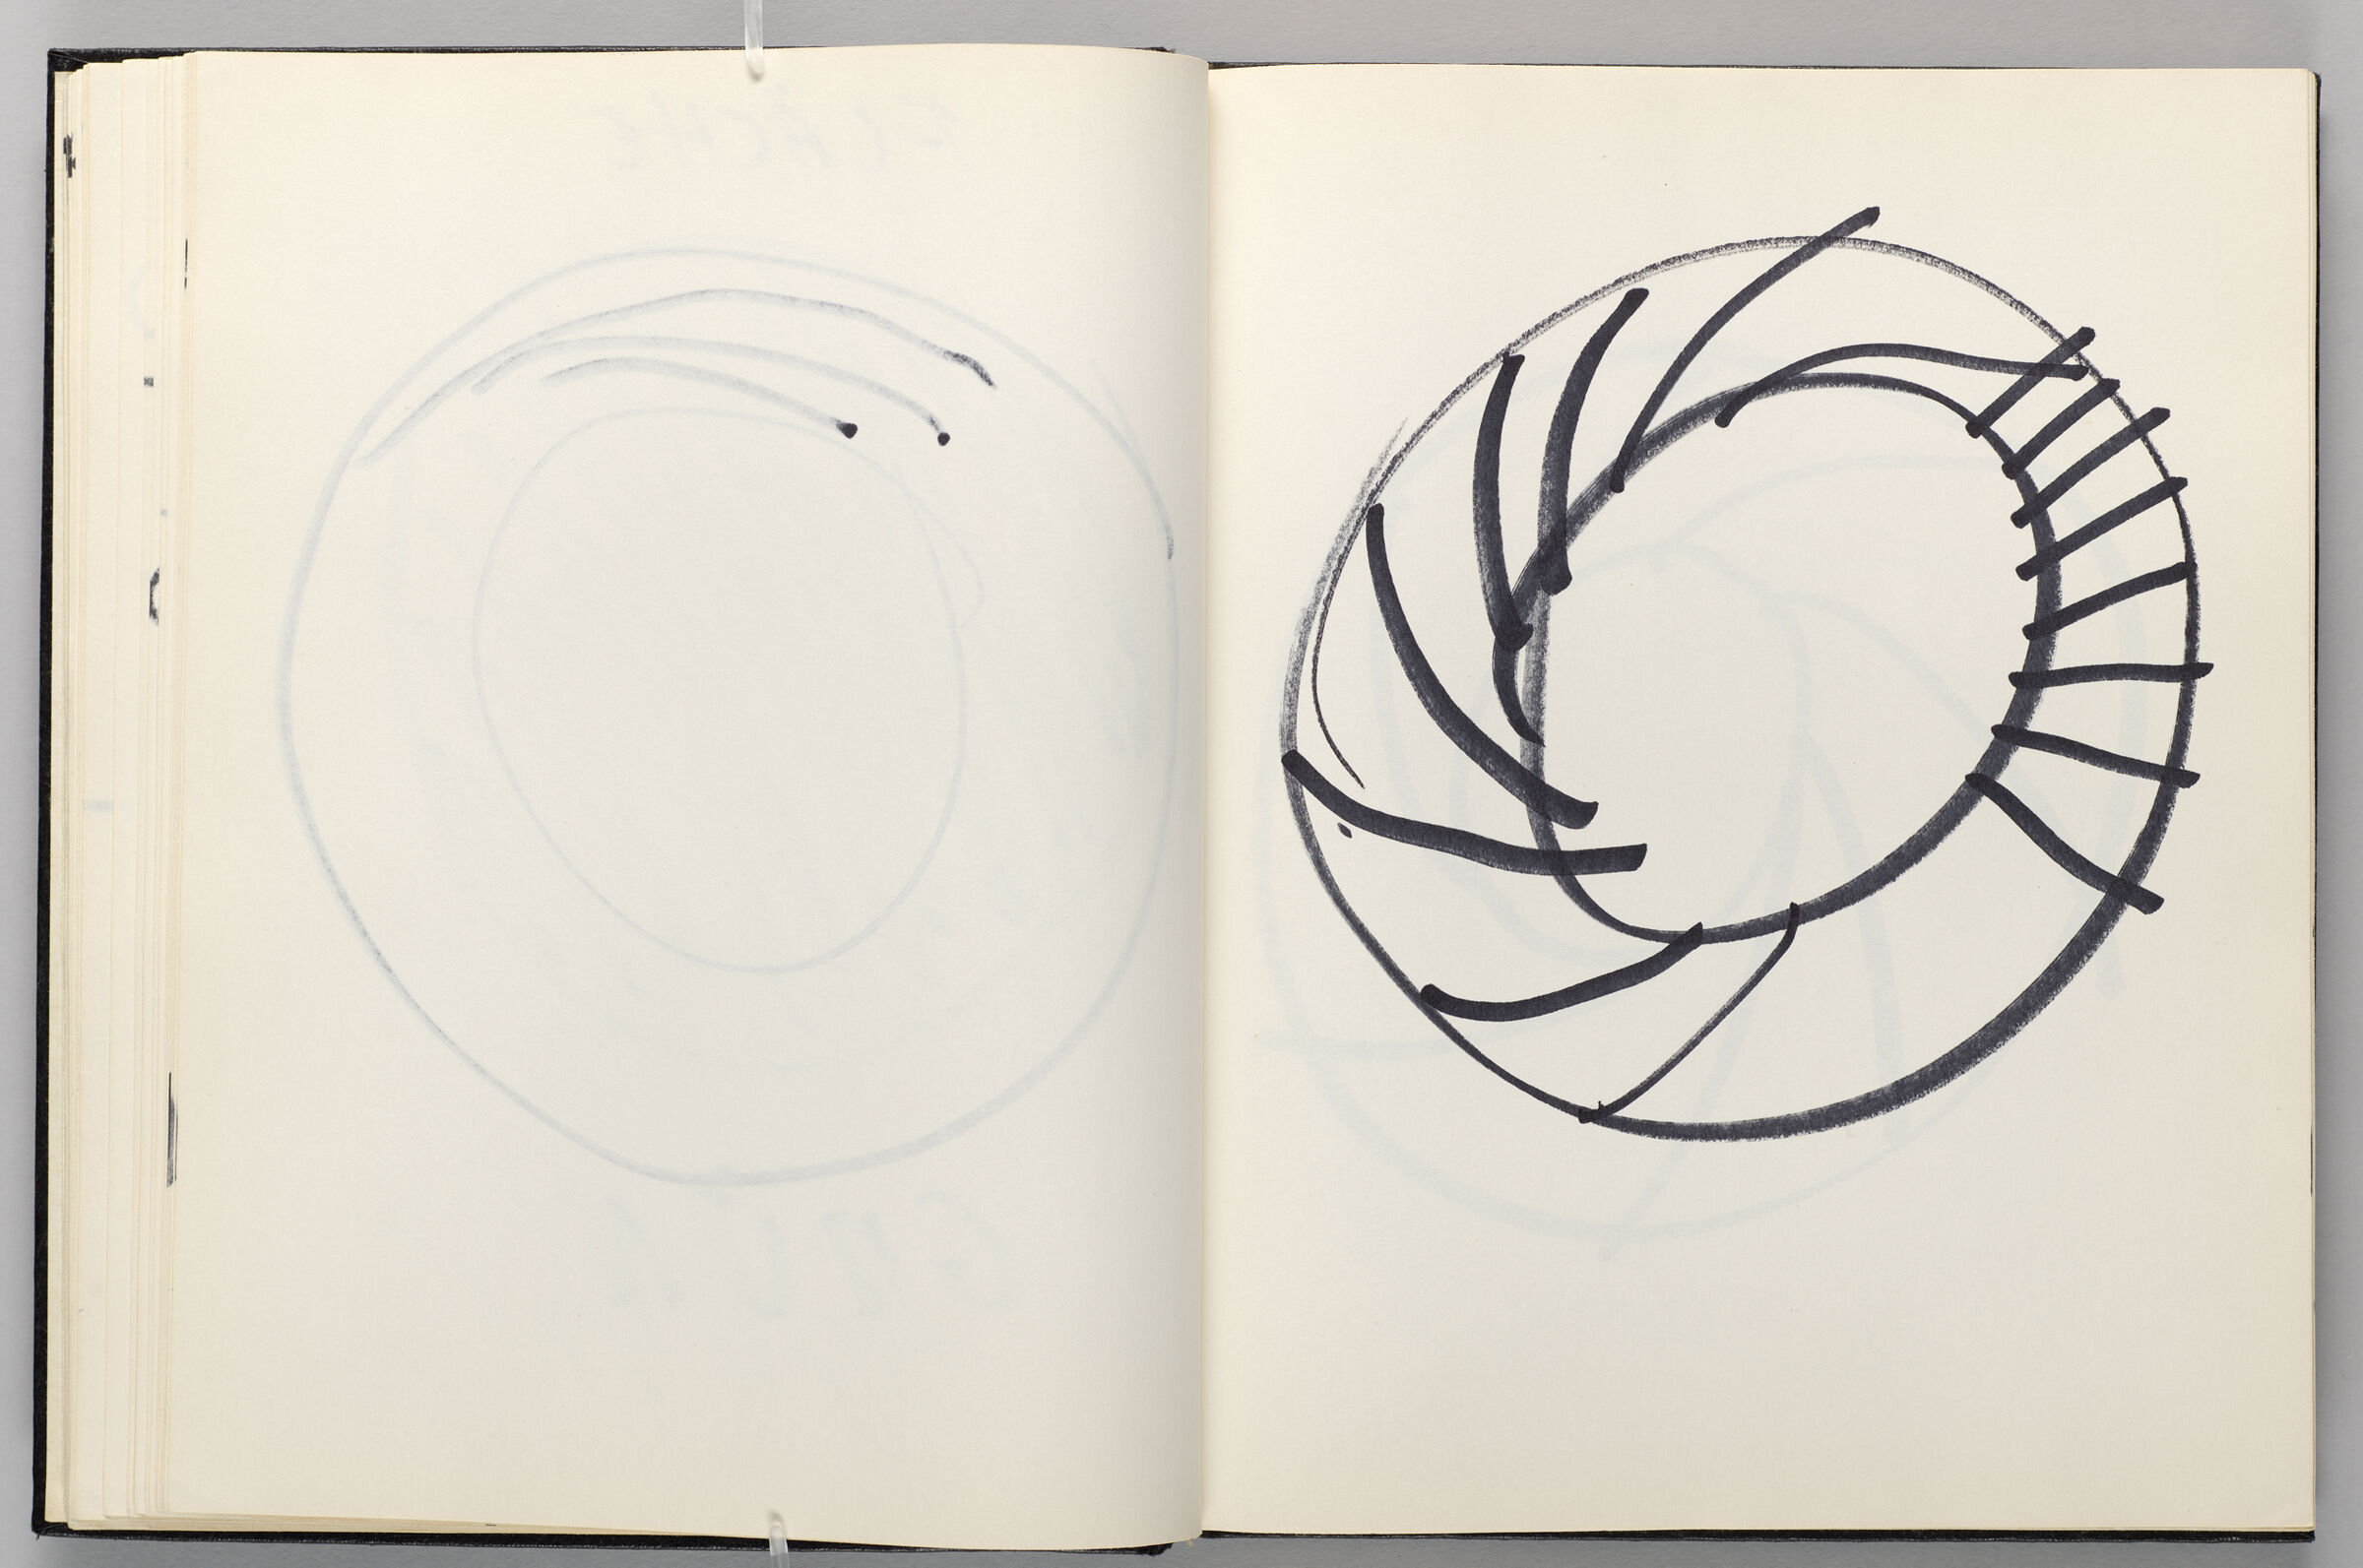 Untitled (Bleed-Through Of Previous Page, Left Page); Untitled (Plate Design, Right Page)